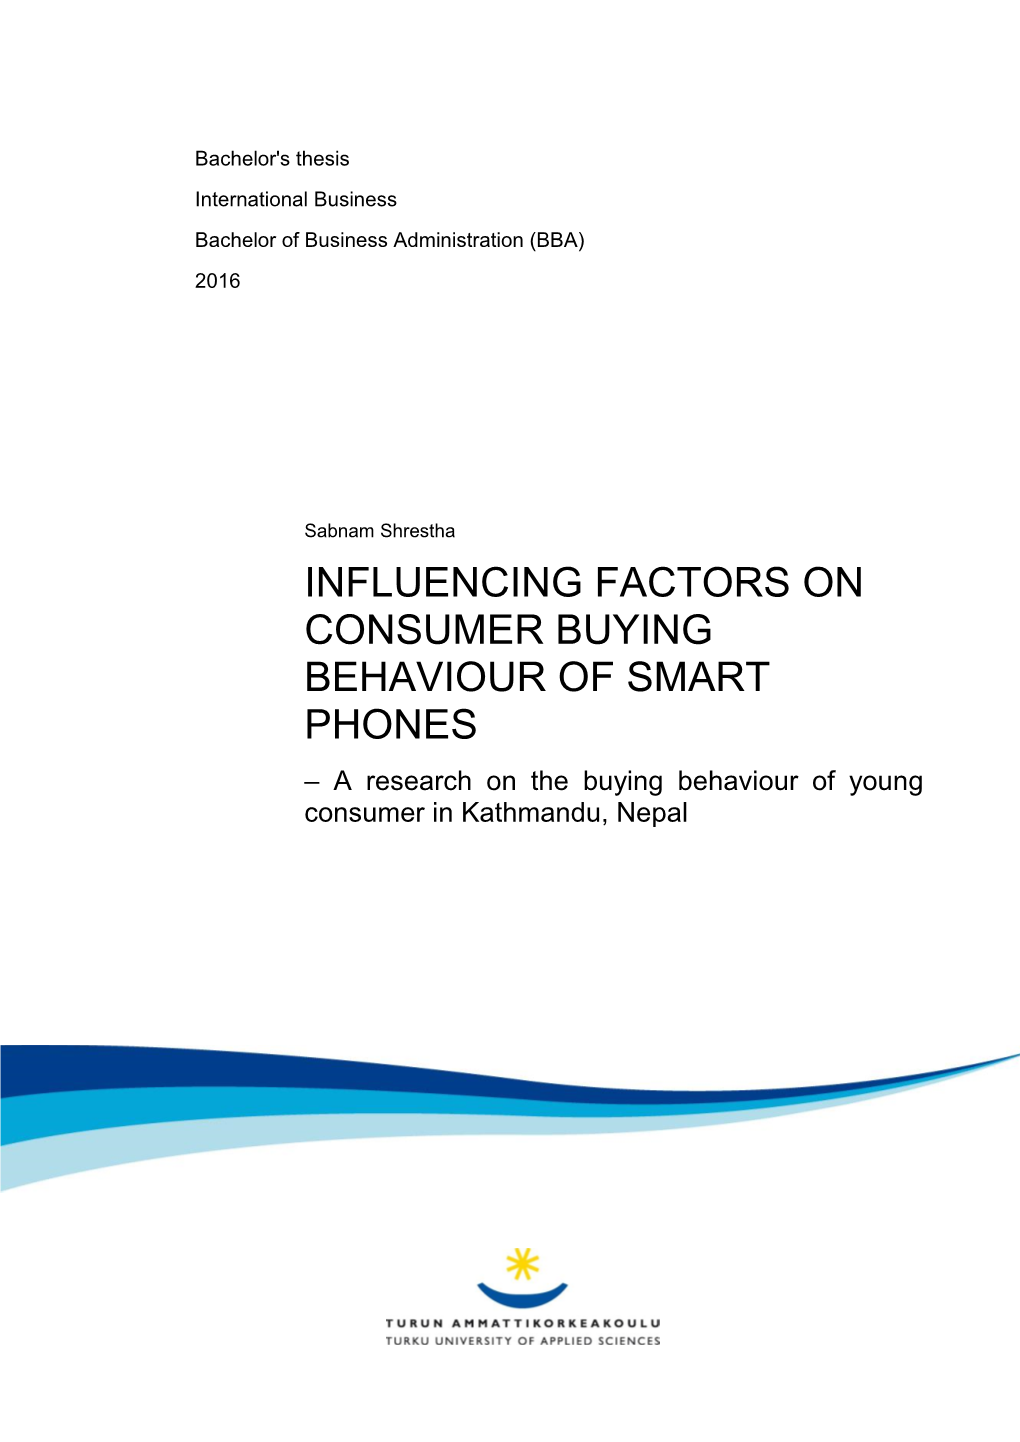 INFLUENCING FACTORS on CONSUMER BUYING BEHAVIOUR of SMART PHONES – a Research on the Buying Behaviour of Young Consumer in Kathmandu, Nepal